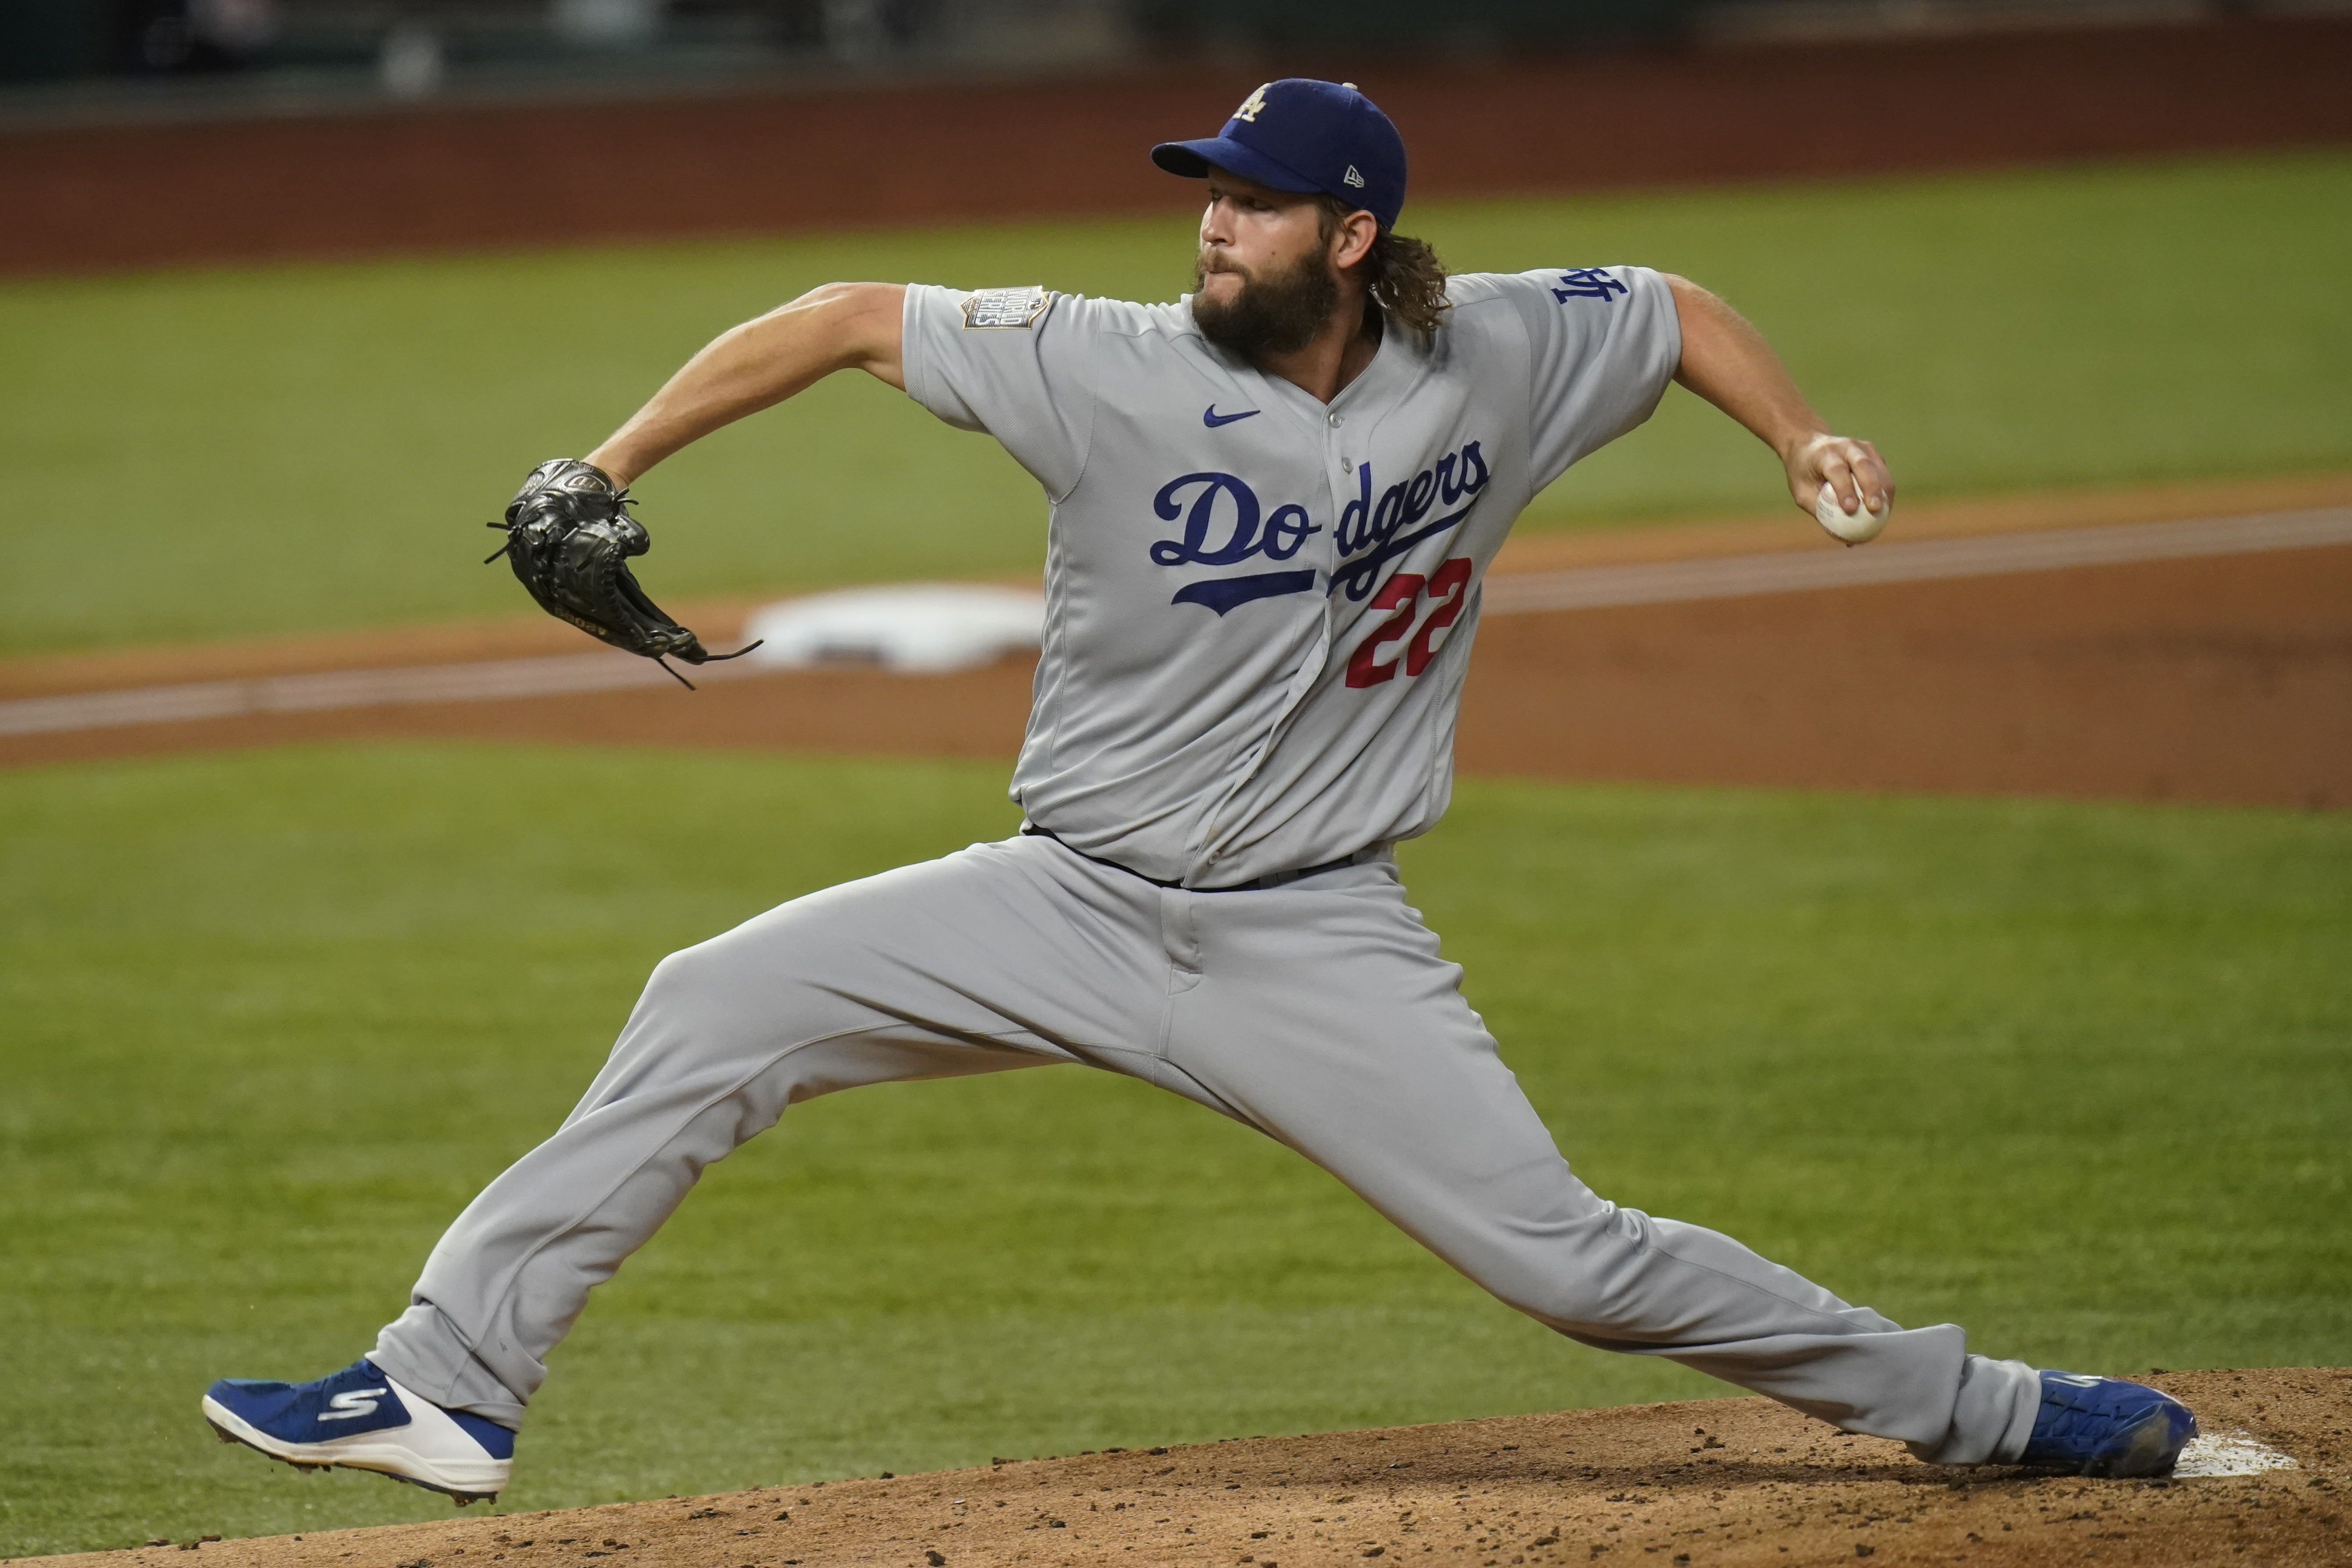 Dodgers vs. Rays score: L.A. takes World Series Game 5, moves one win away  from title behind Kershaw, bullpen 